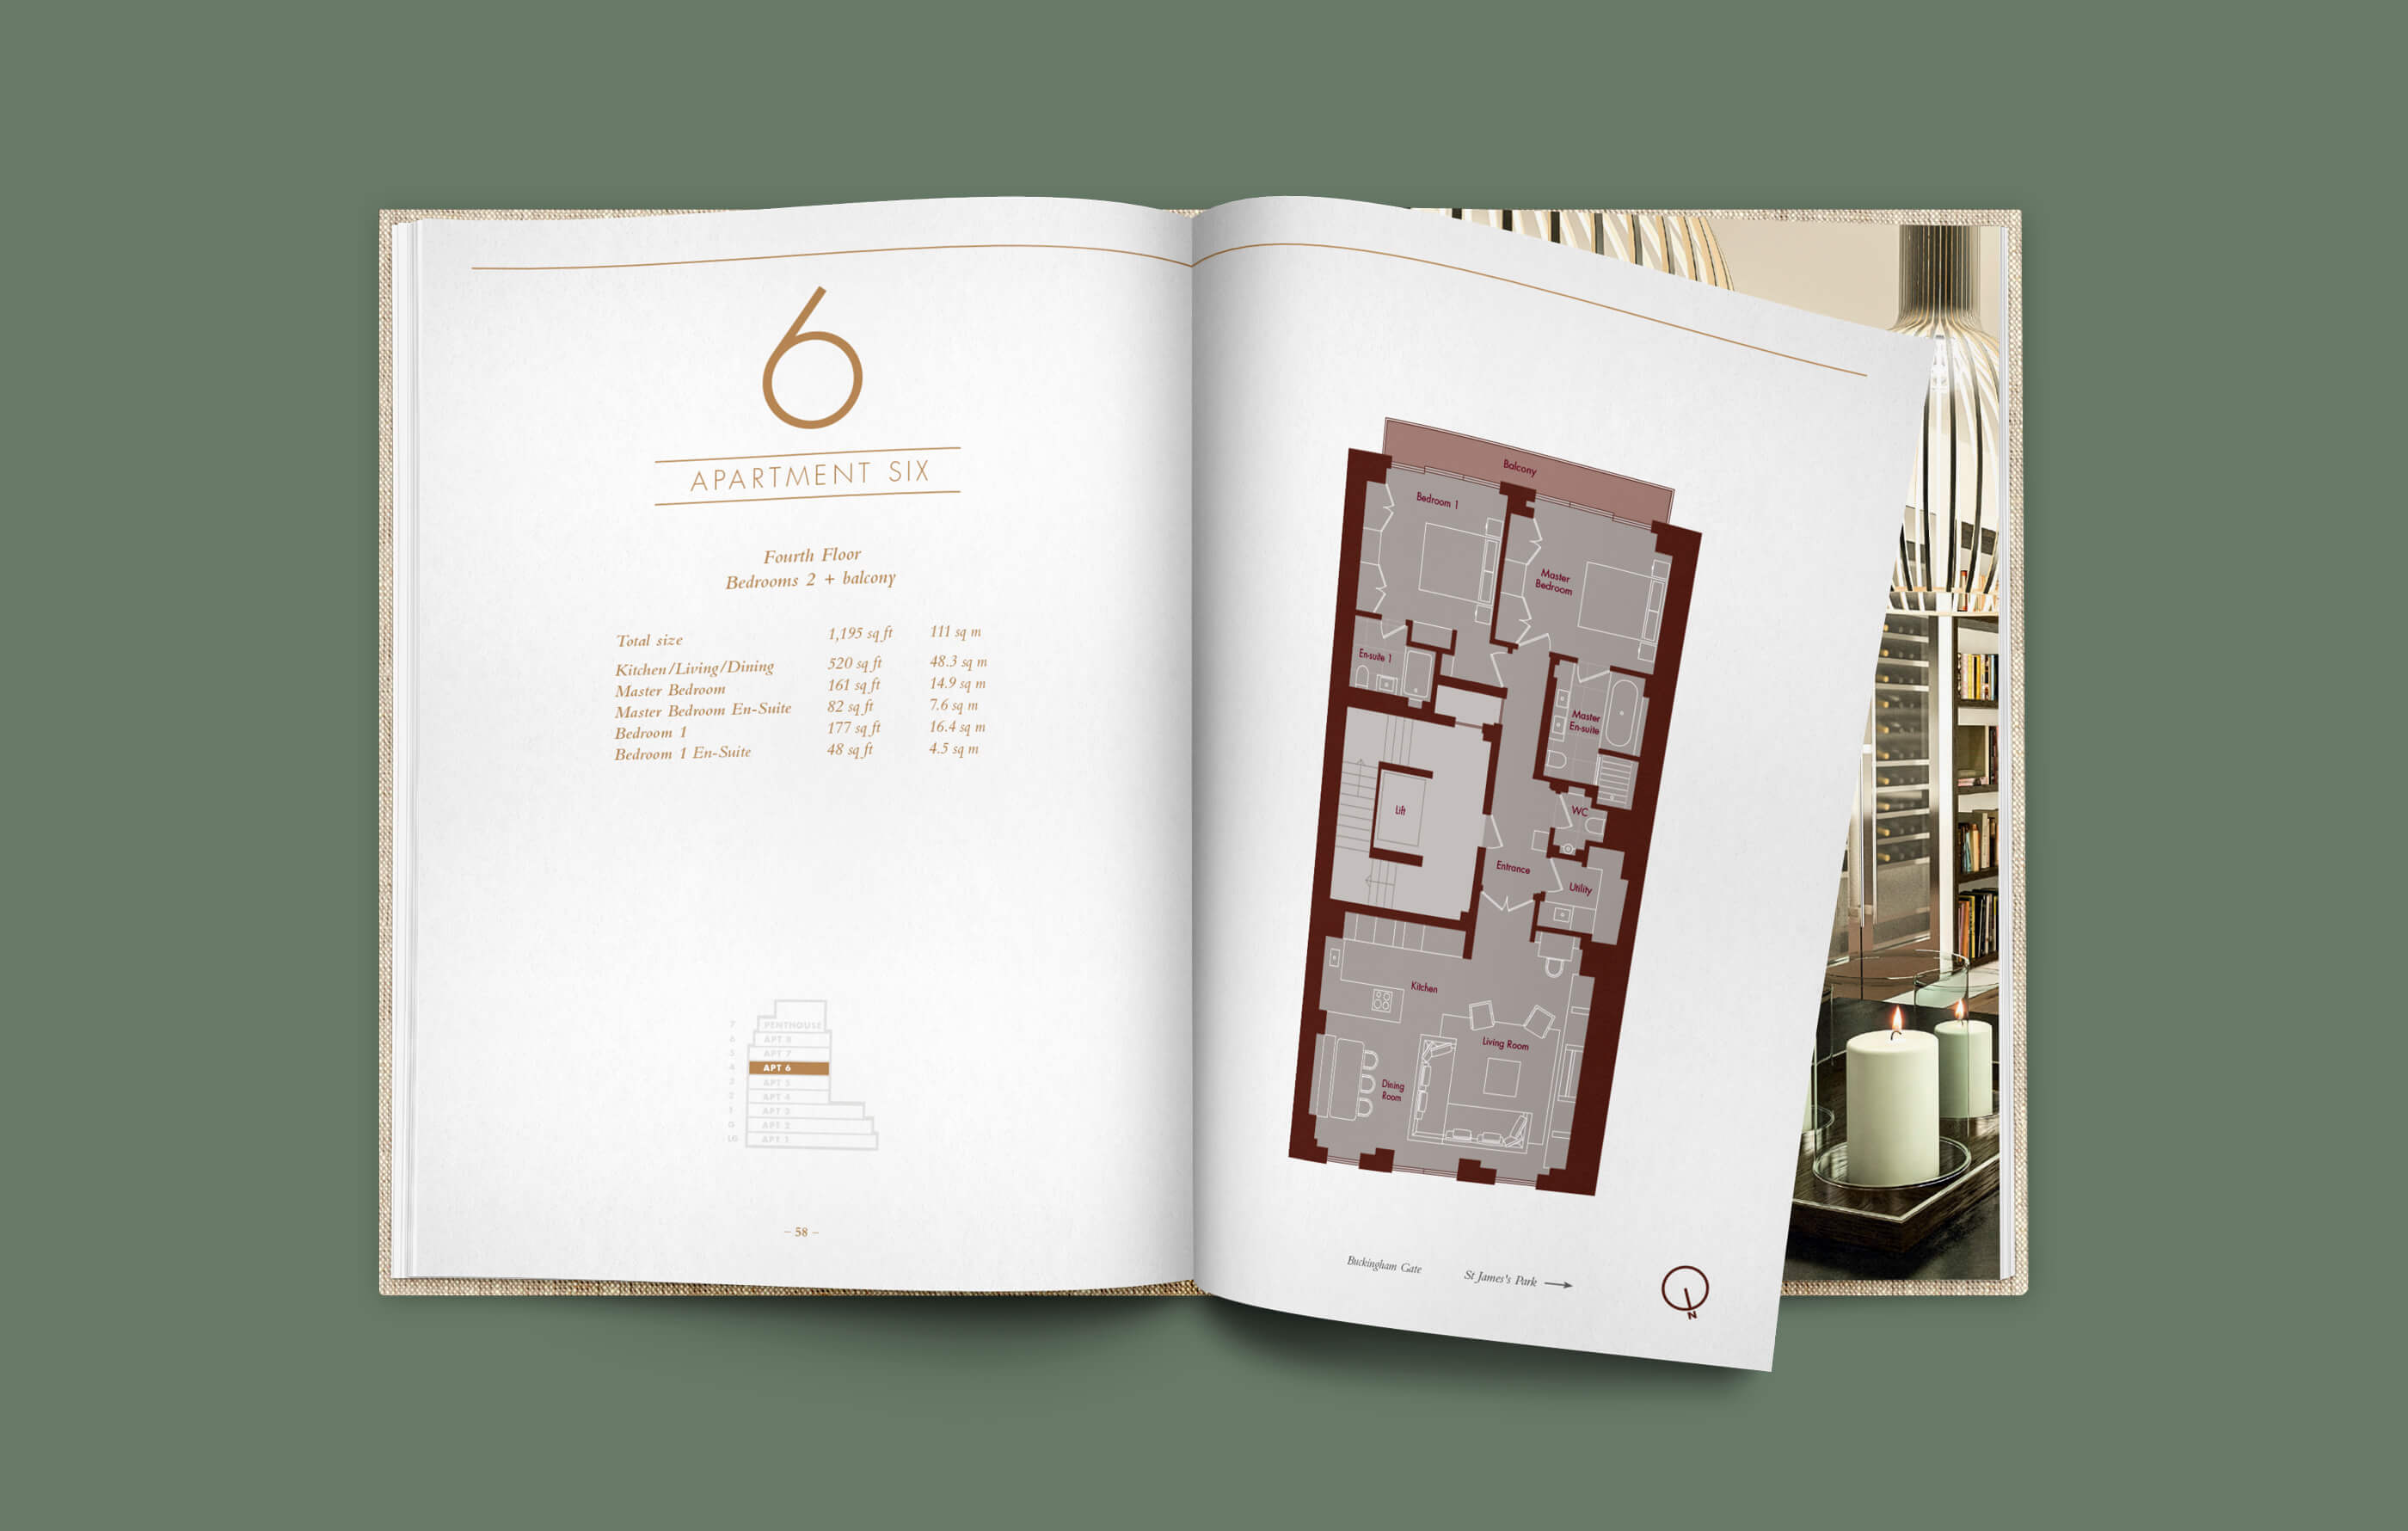 Open brochure spread of apartment 6, a fourth floor flat with 2 bedrooms and a balcony